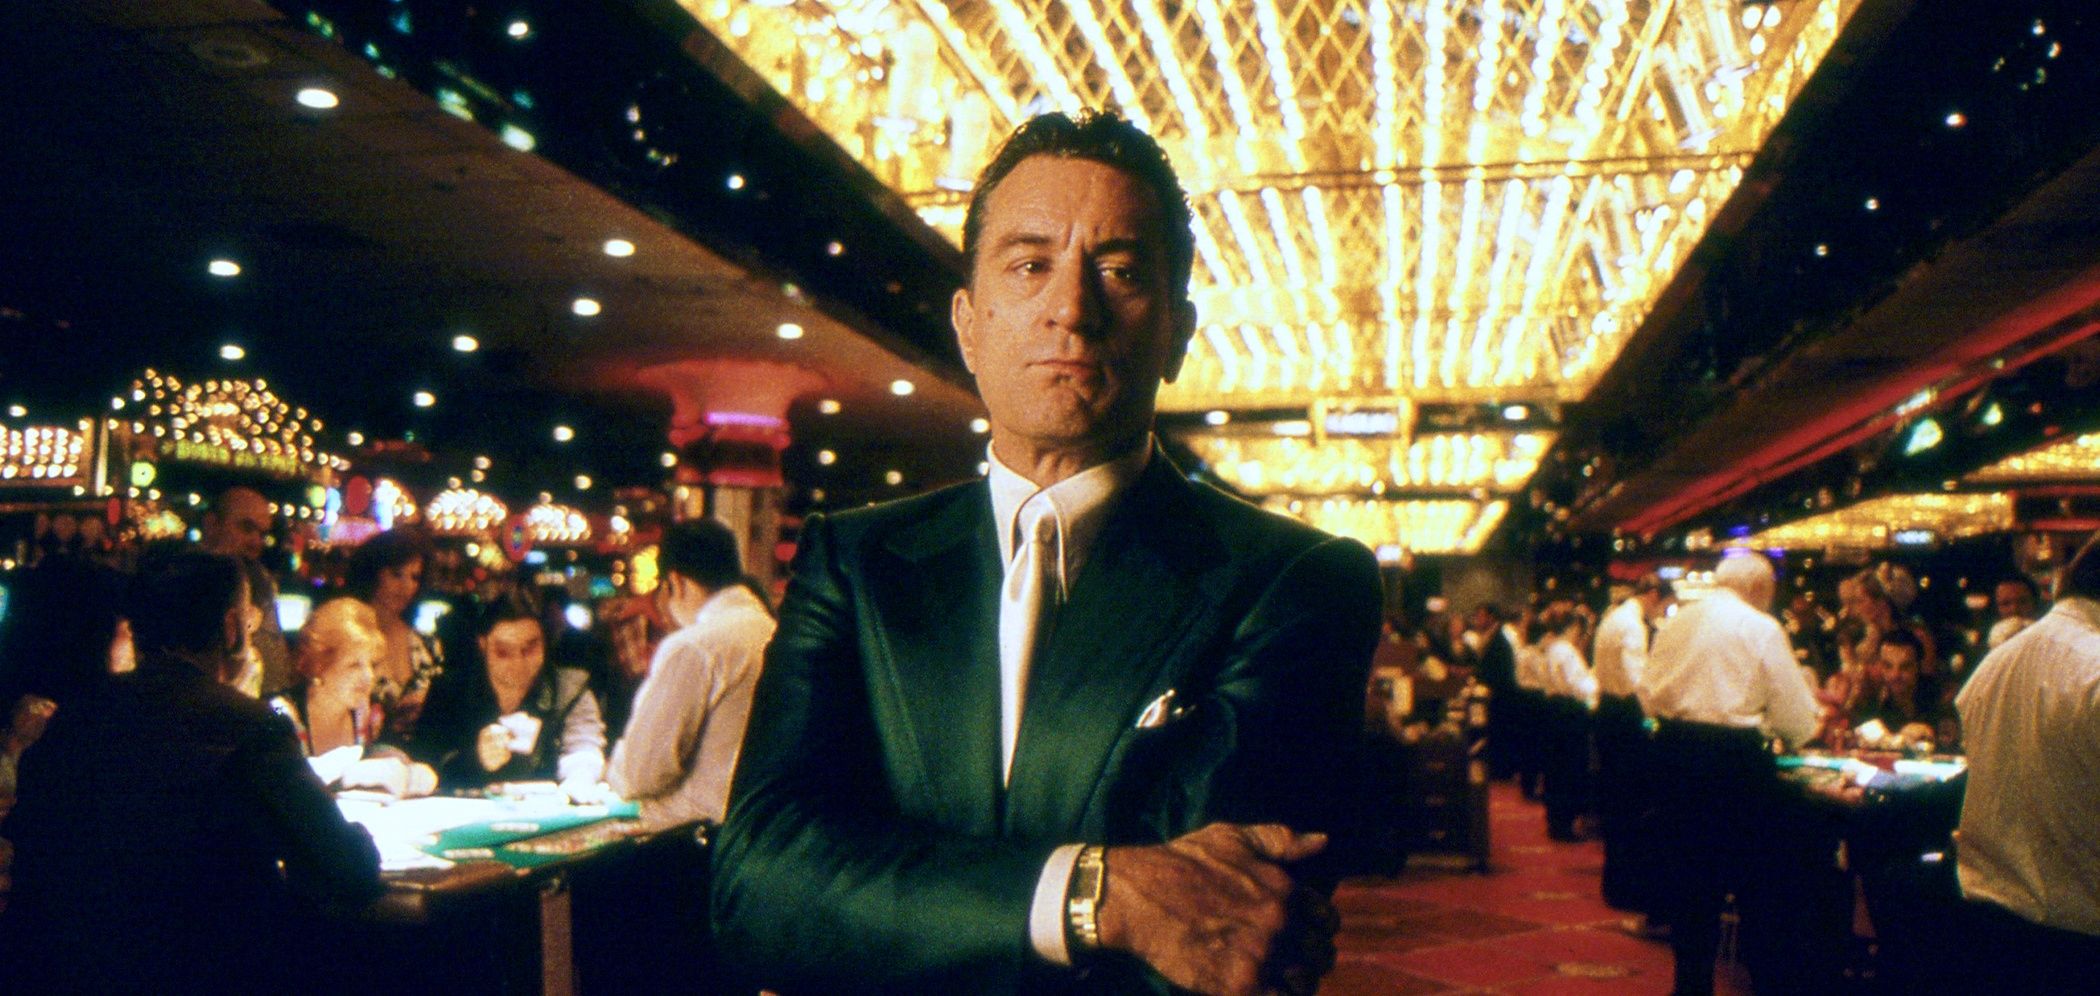 Martin Scorsese His 5 Best Gangster Films (& 5 Best That Have Nothing To Do With Organized Crime)